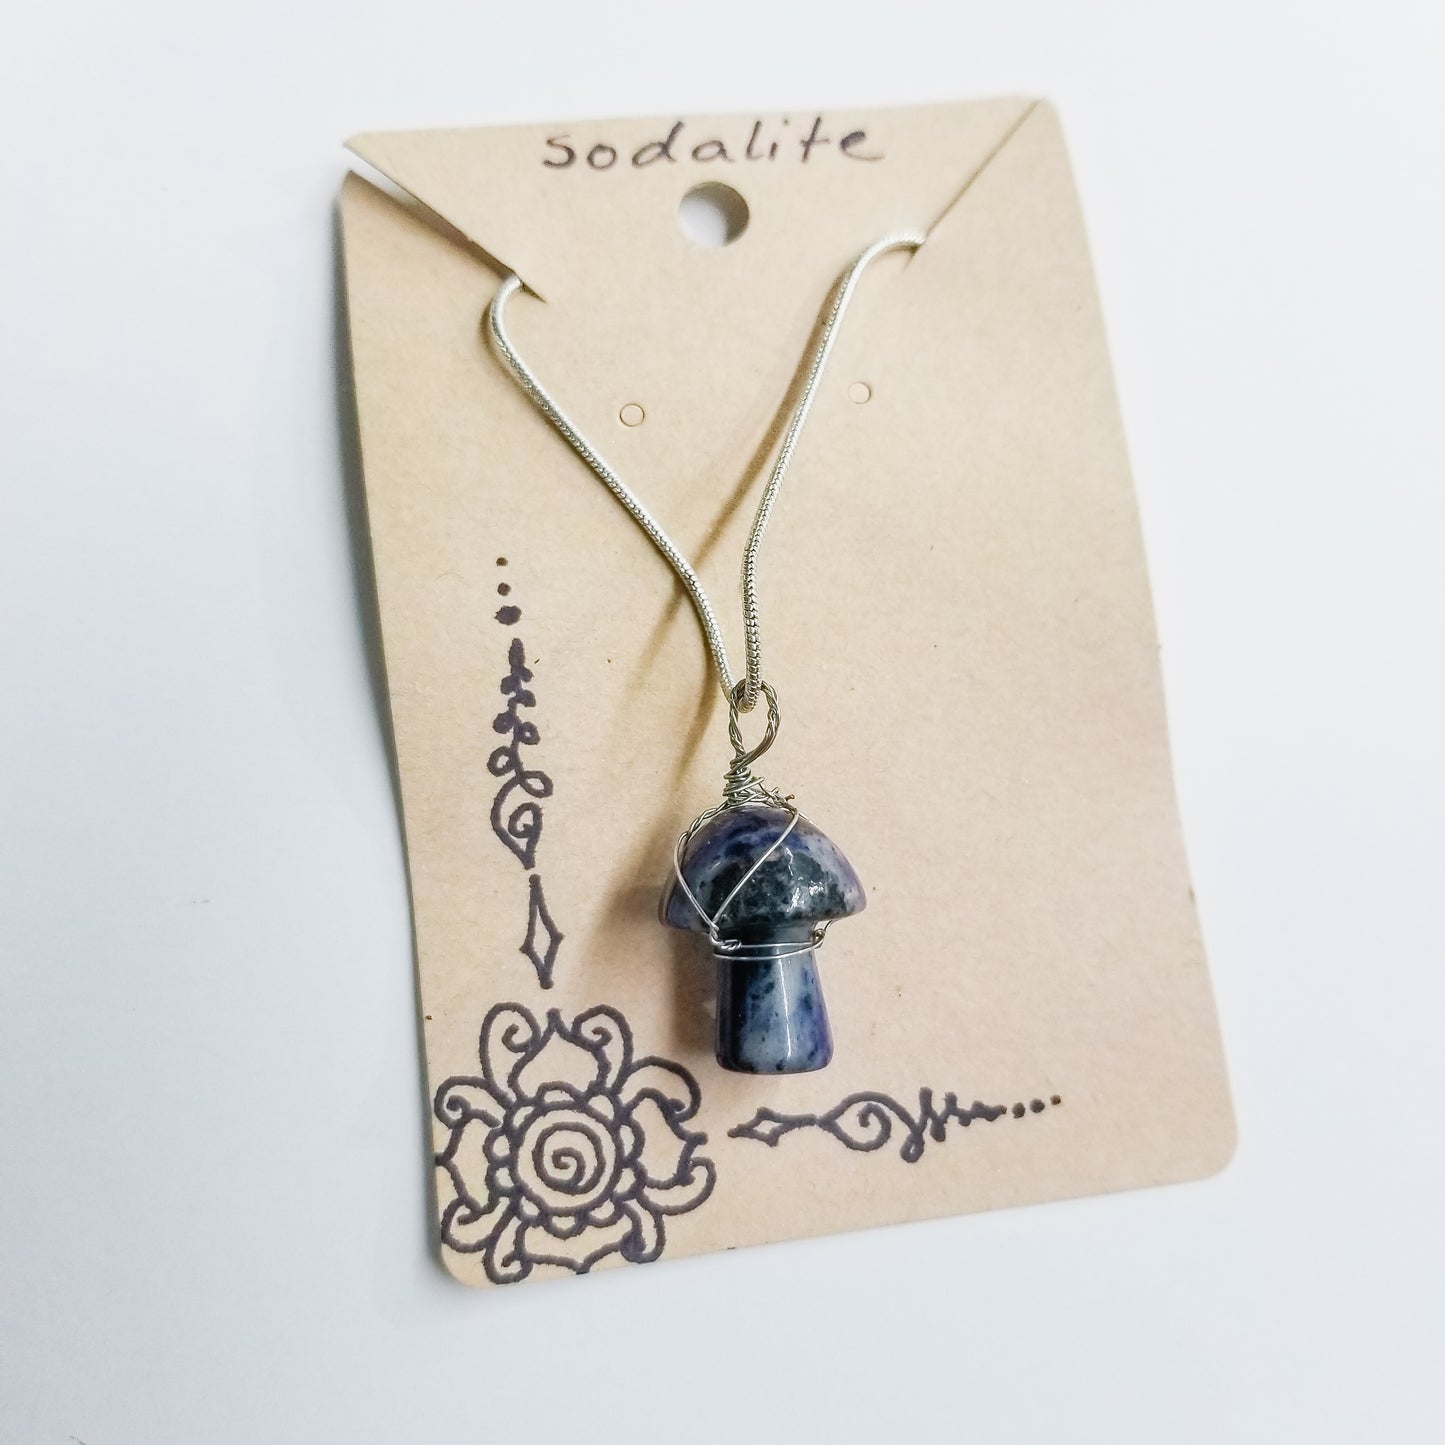 Sodalite Mushi Handwrapped Necklace